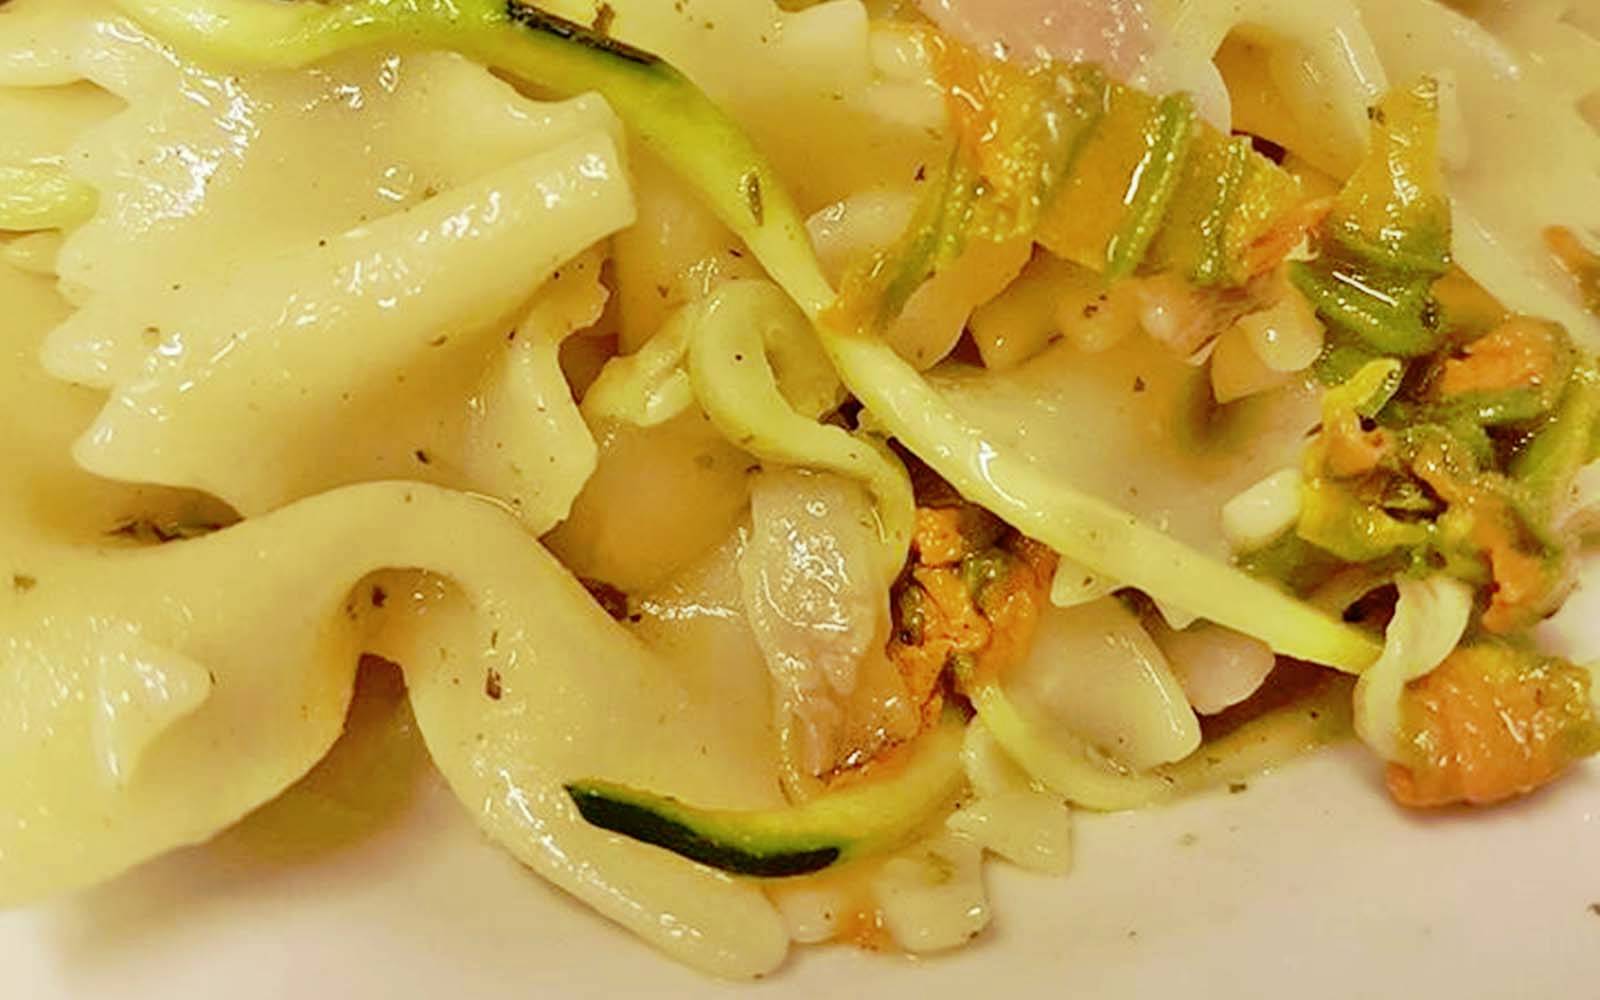 Farfalle with courgette flowers